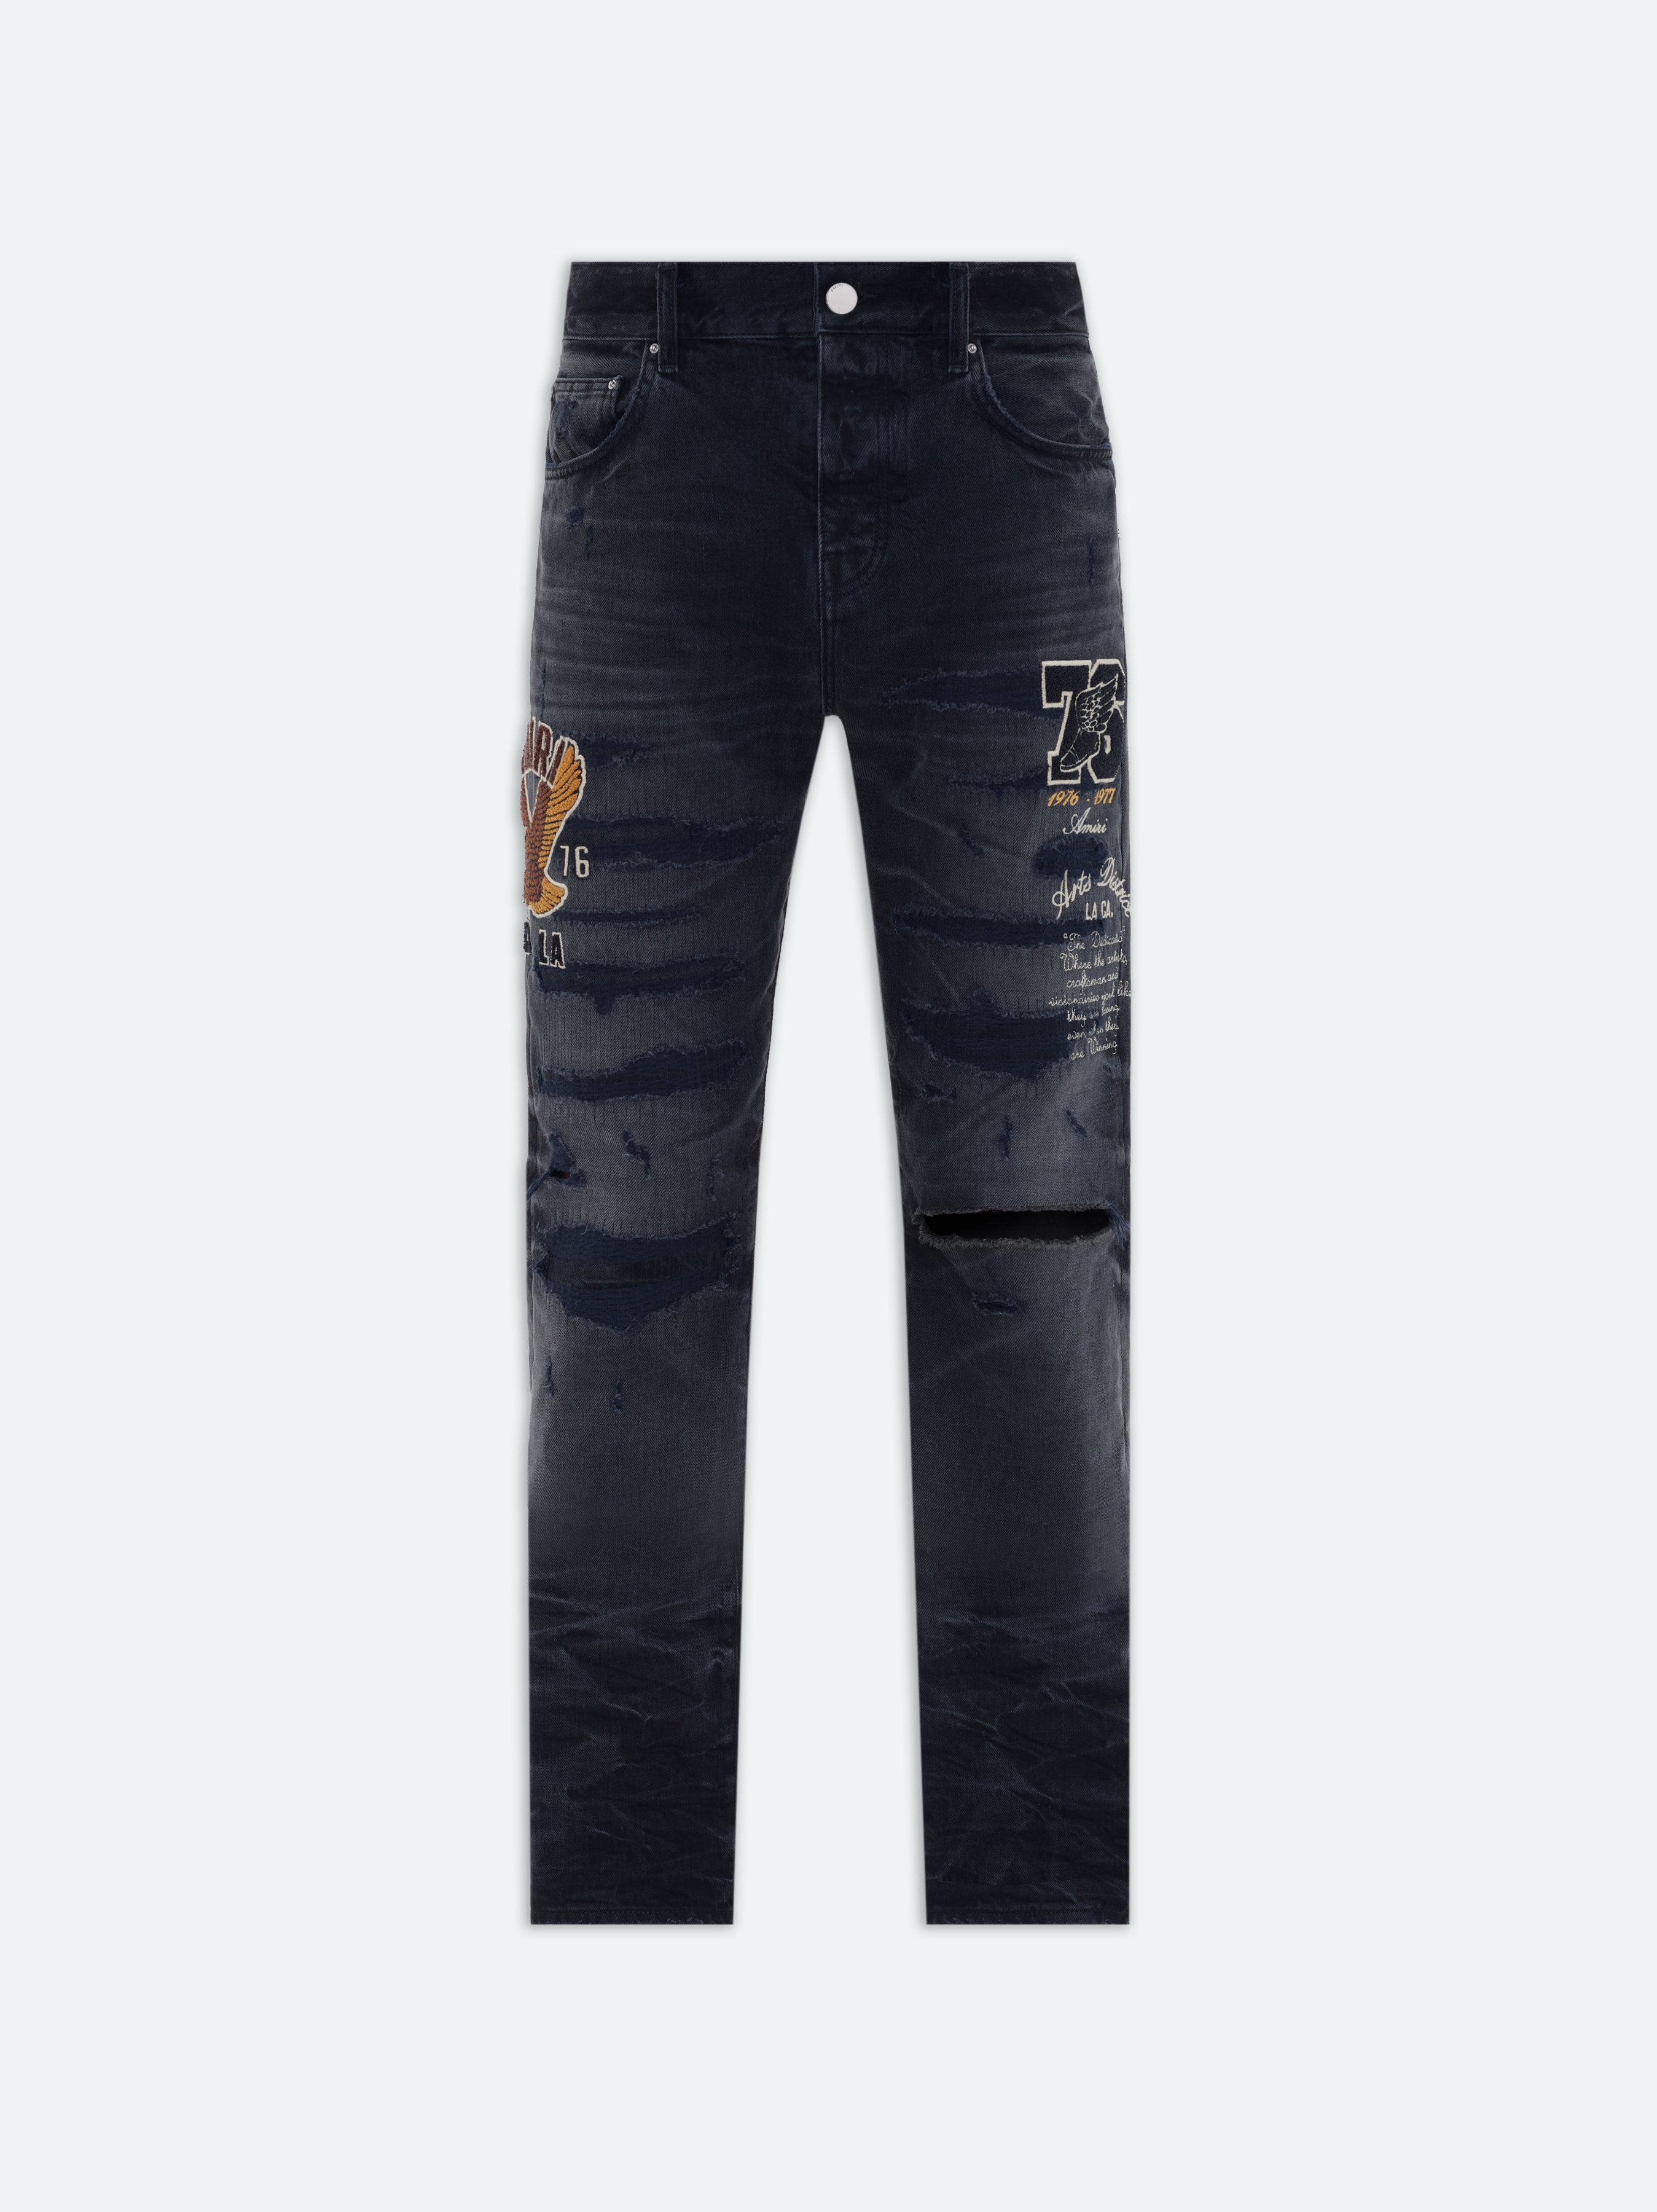 Product Varsity Straight Jean - Faded Black featured image